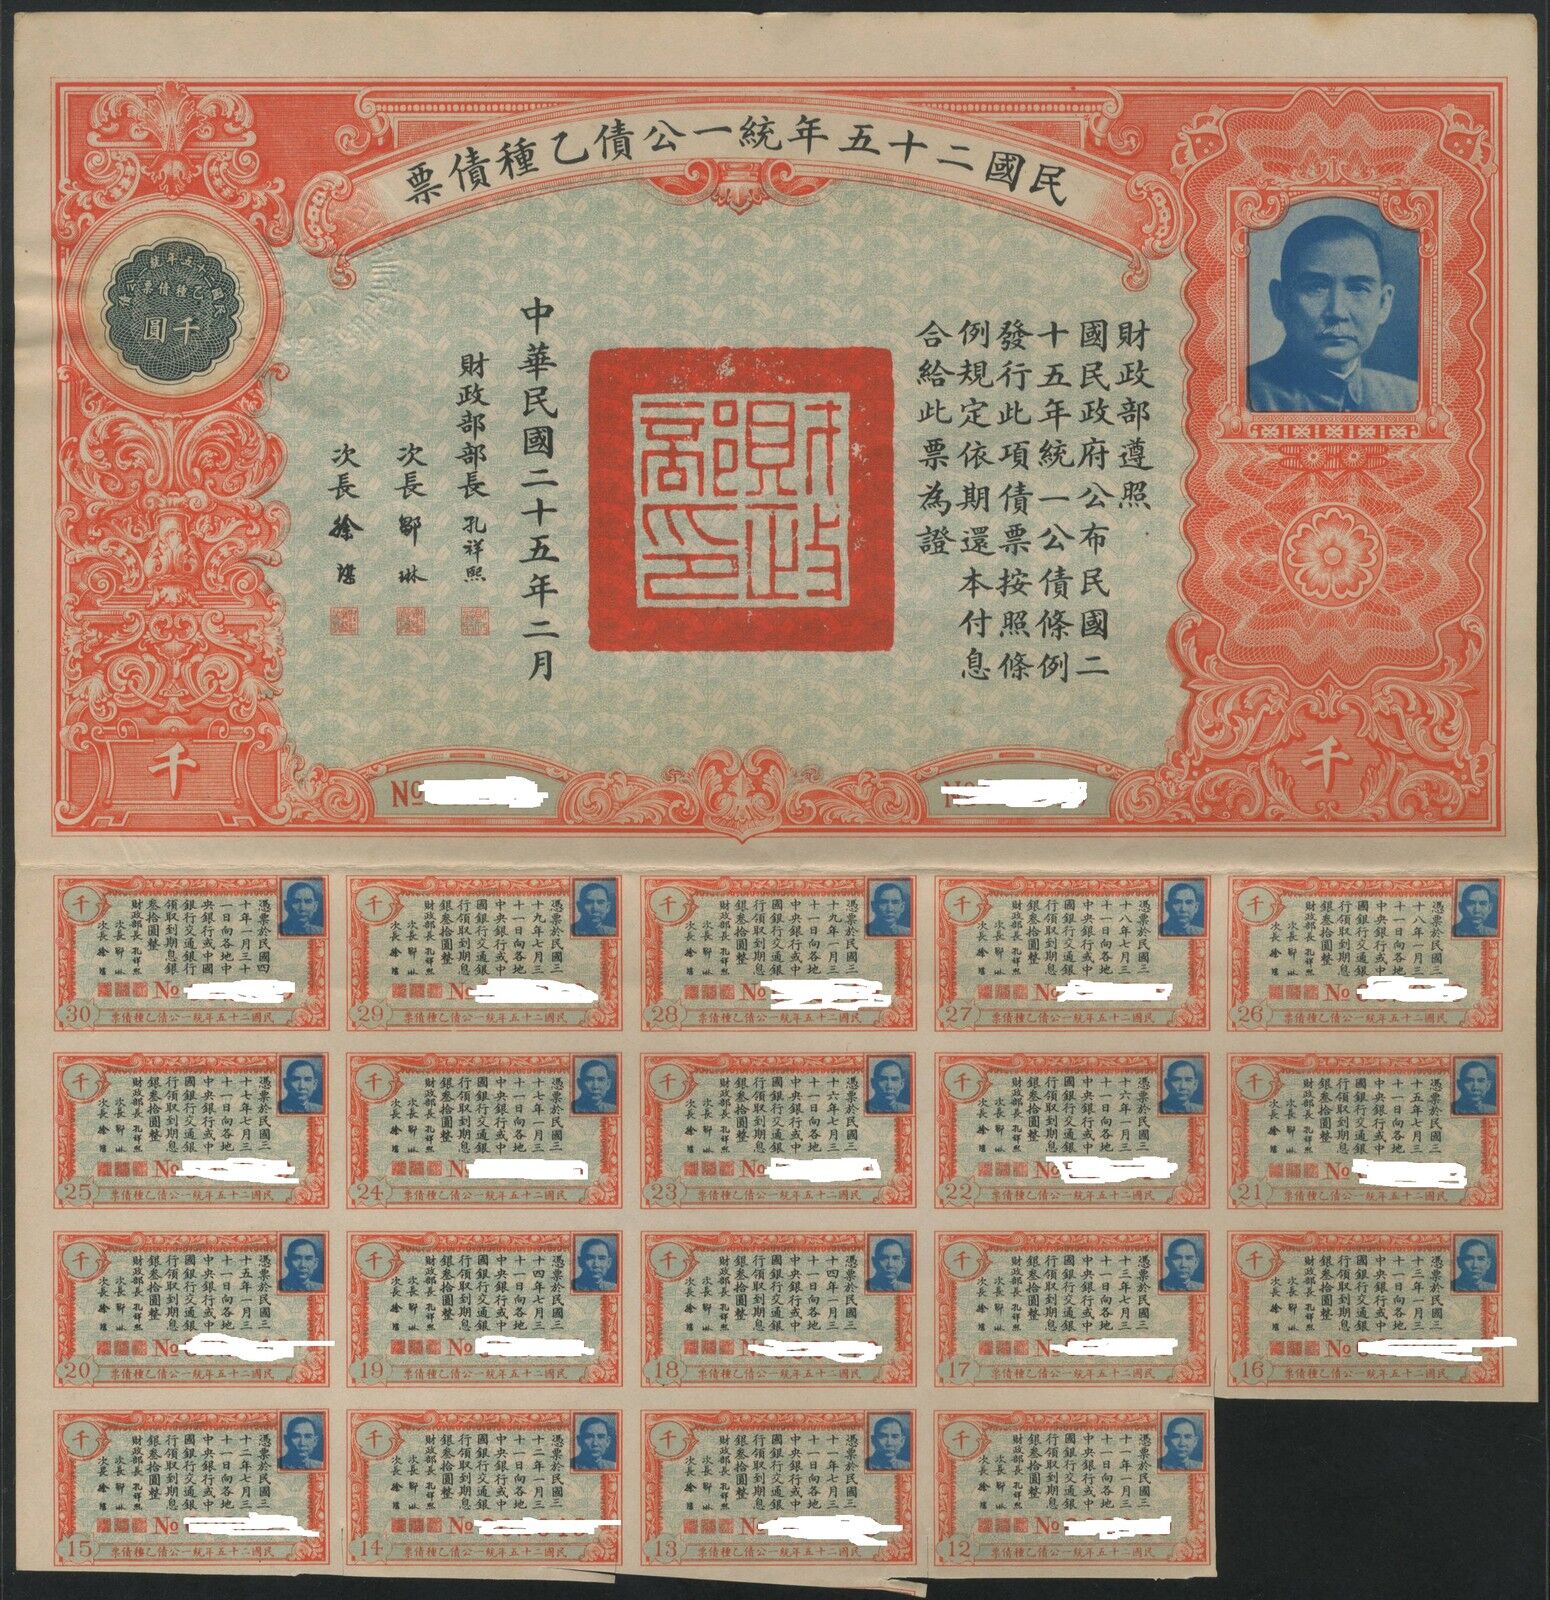  China 1936 Unification Bond Type B $1000 Uncancelled with coupons  